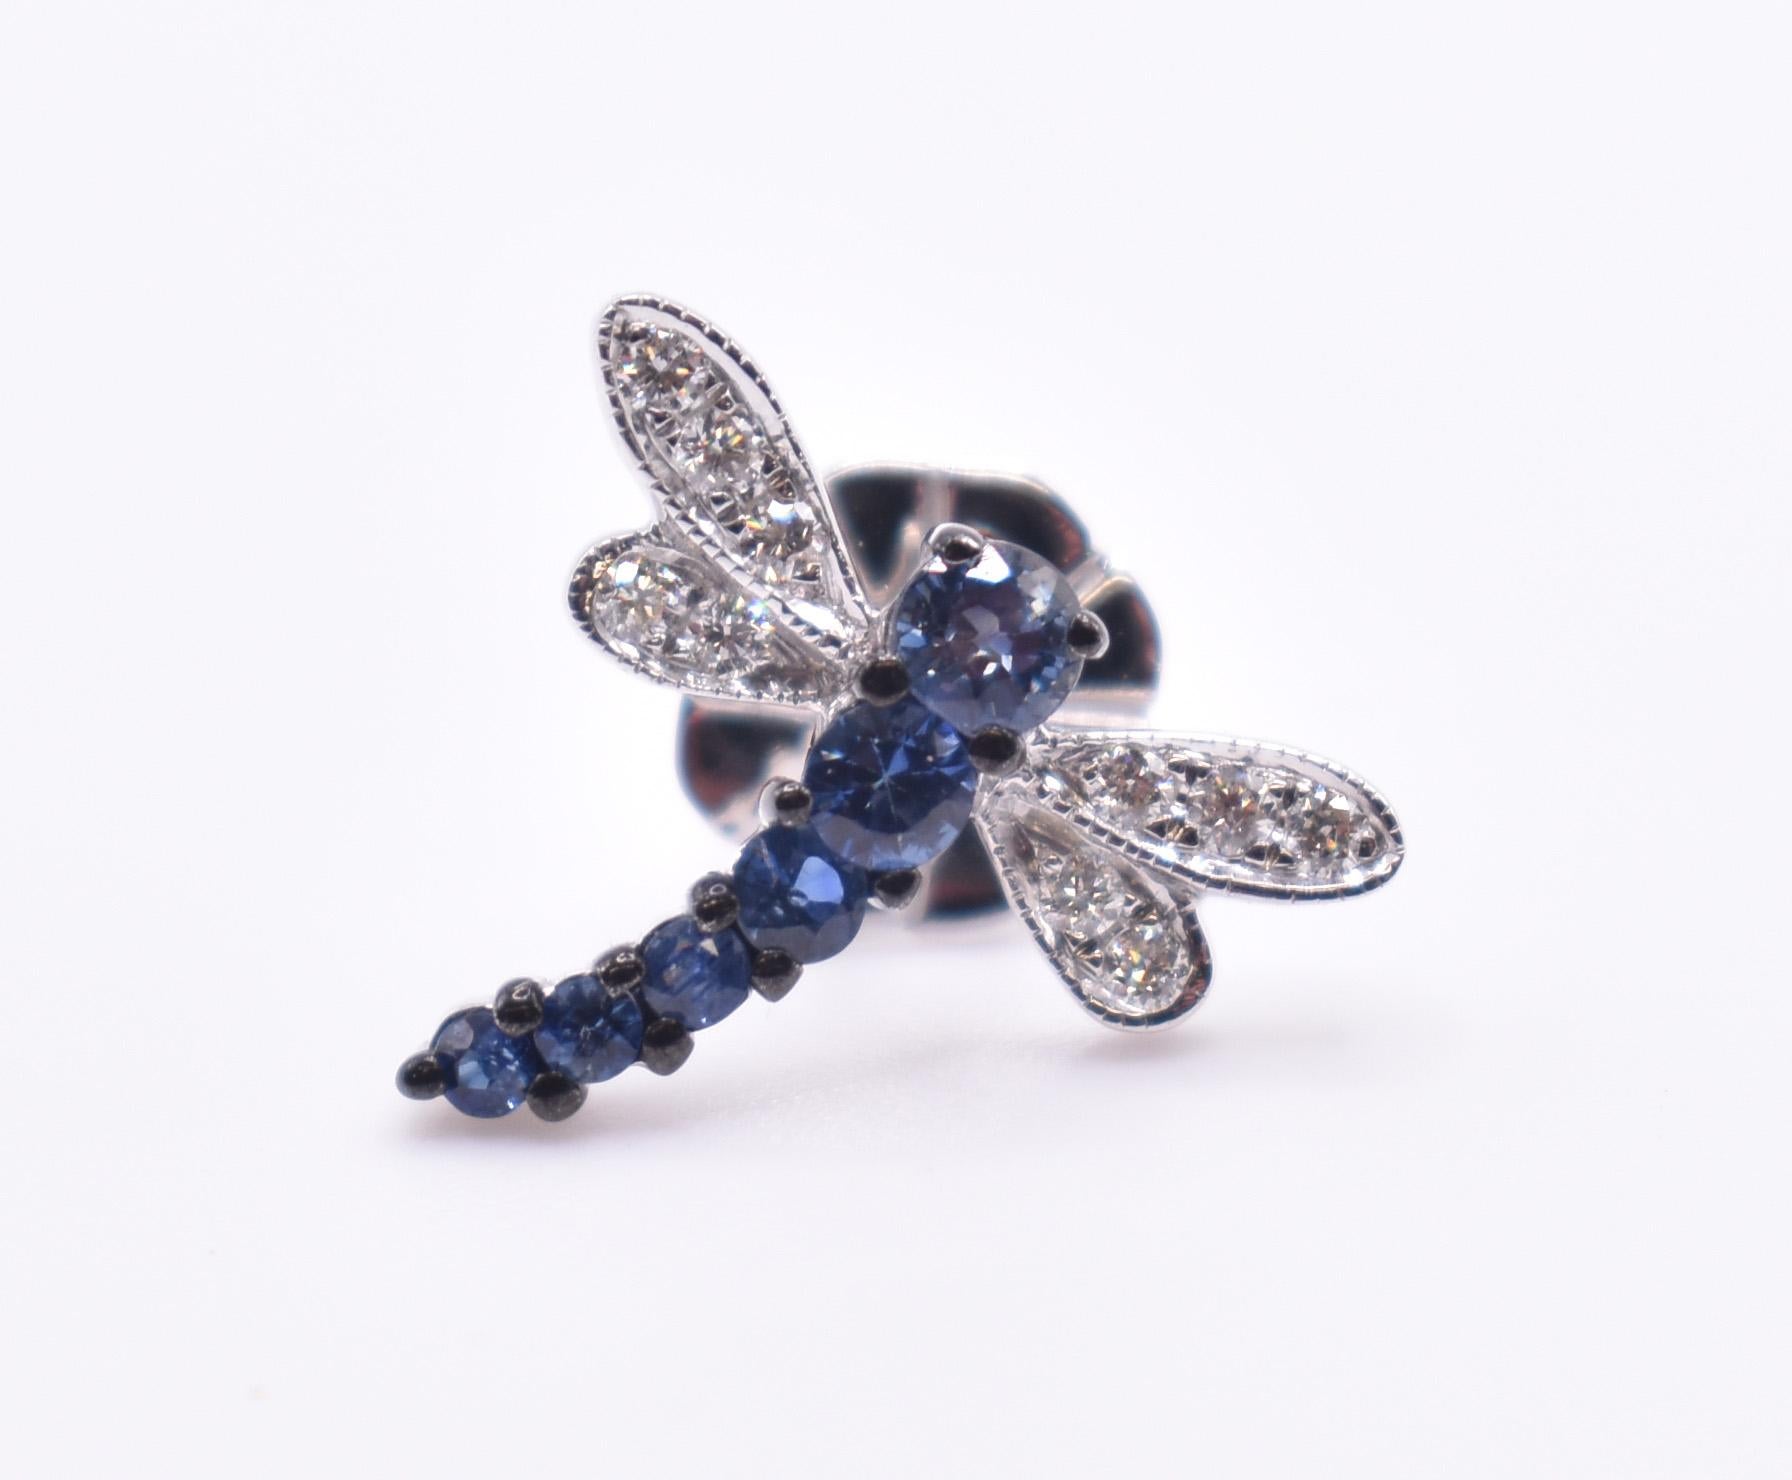 On offer for sale is a charming pair of 18k white gold diamond and sapphire dragon fly earrings. 

Total Carat Weight (Diamonds): 0.28ct

Total Carat Weight (Sapphires): 0.73ct
